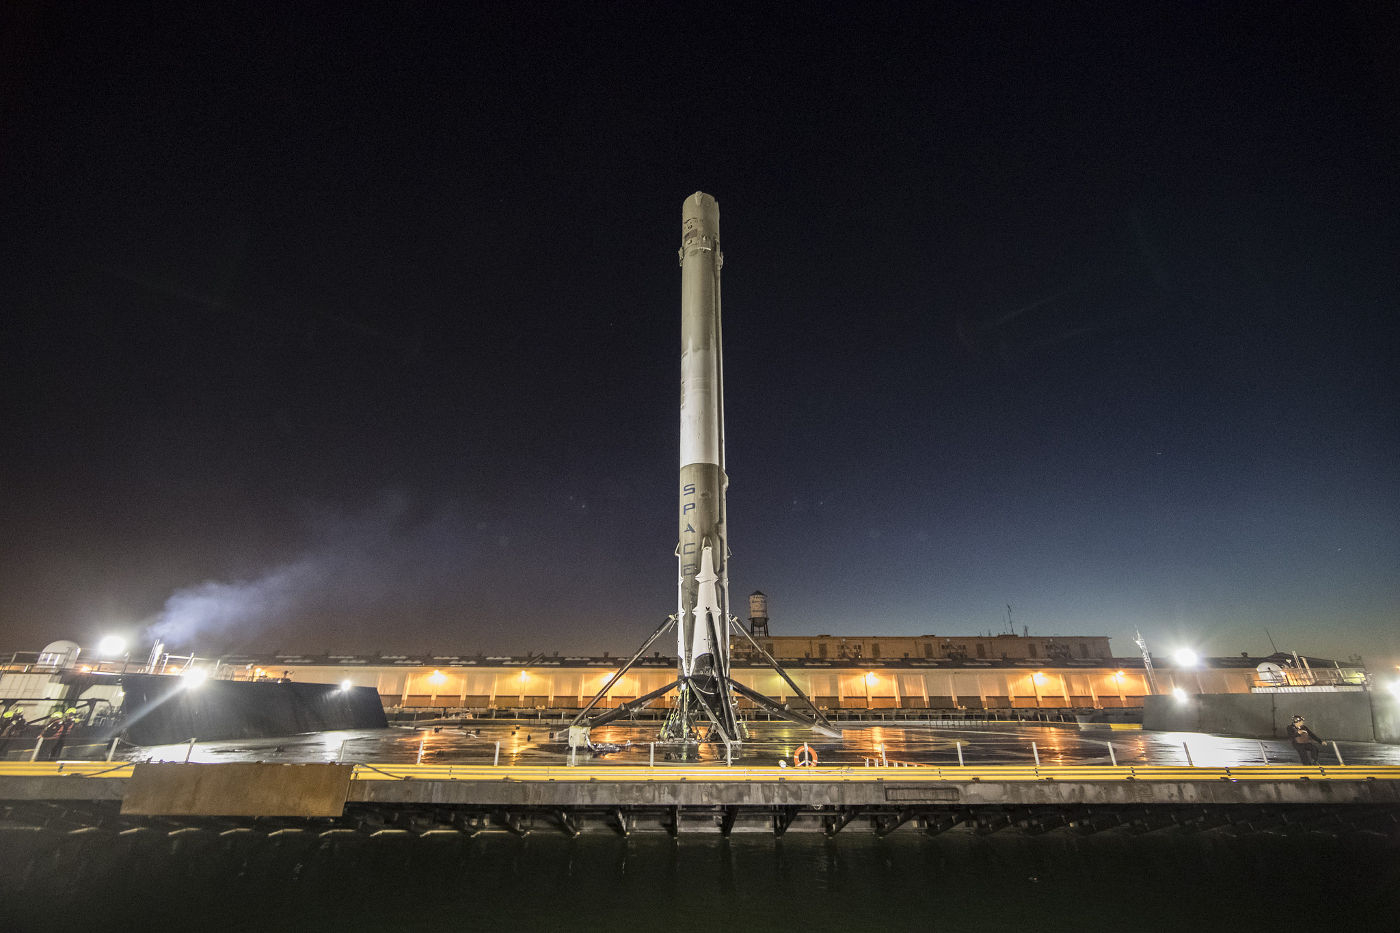 SpaceX is going to launch a rocket every two weeks